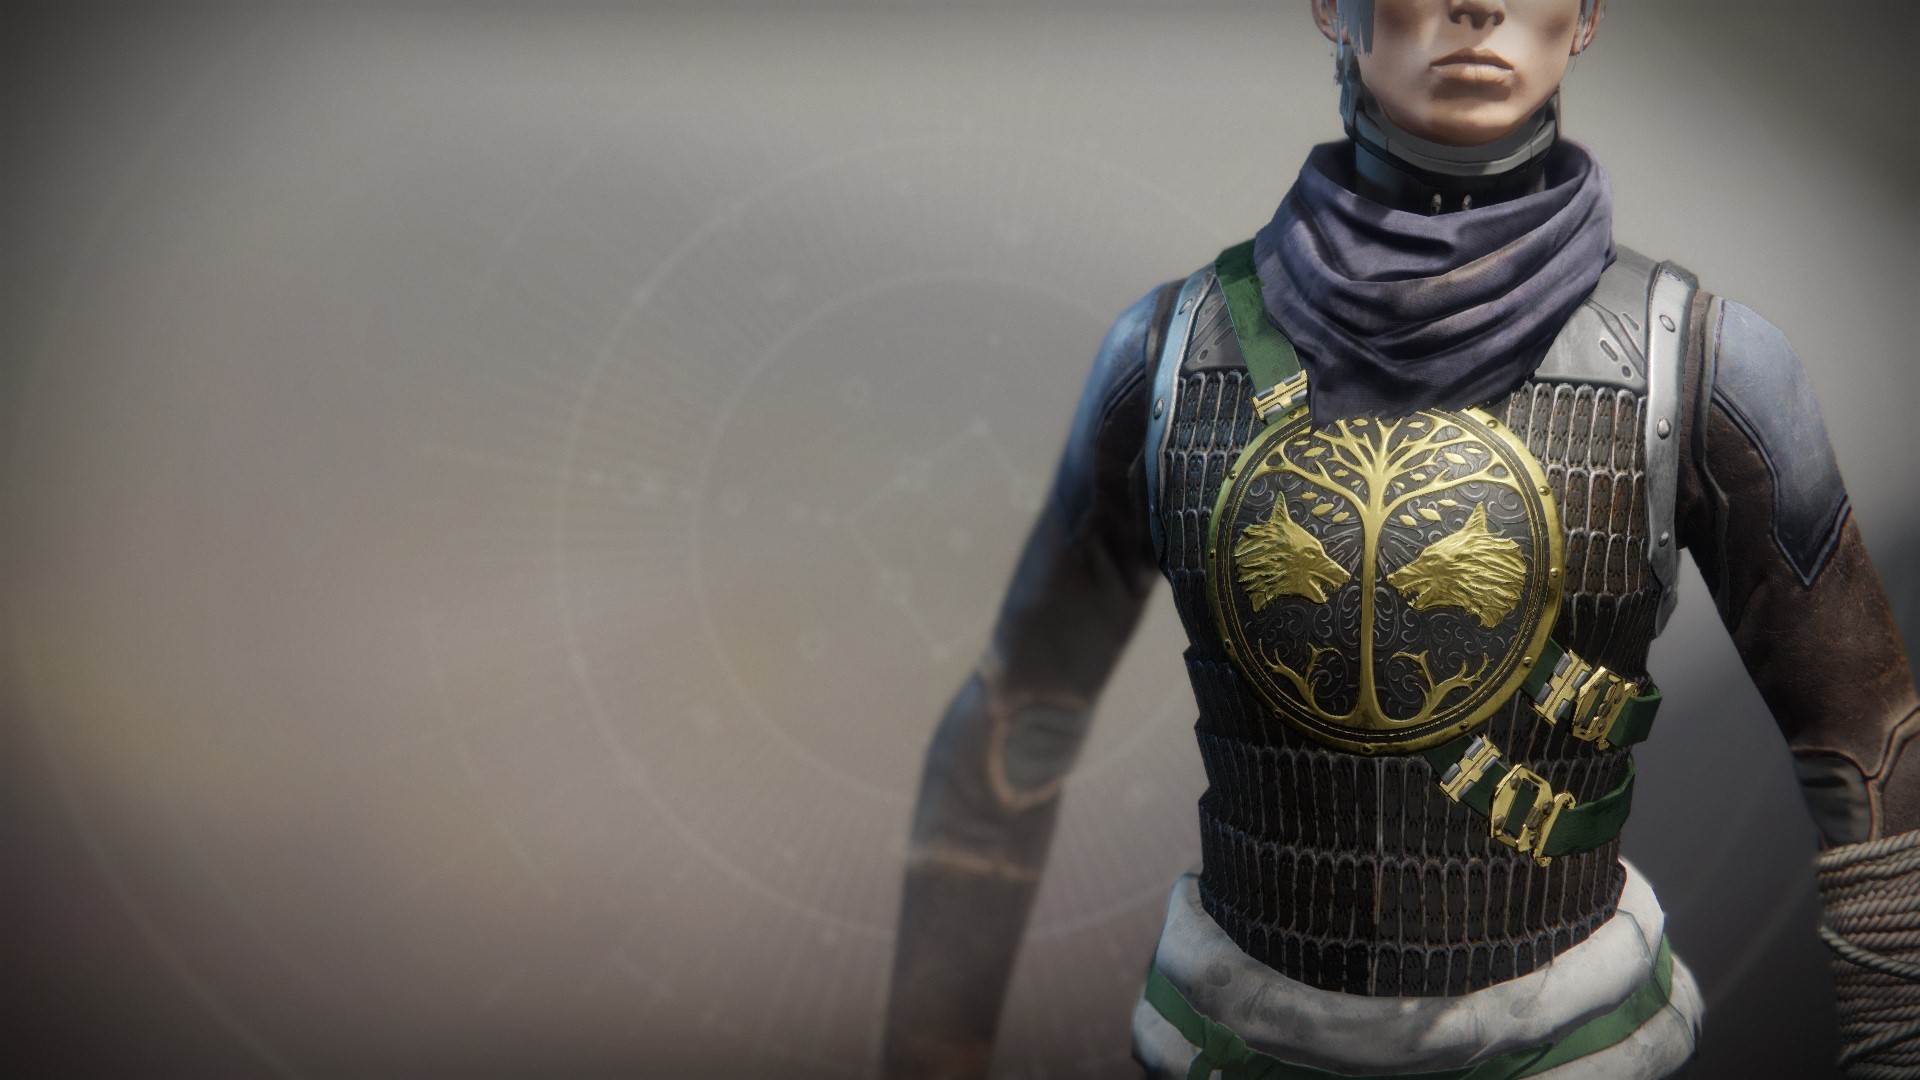 An in-game render of the Iron Truage Vest.